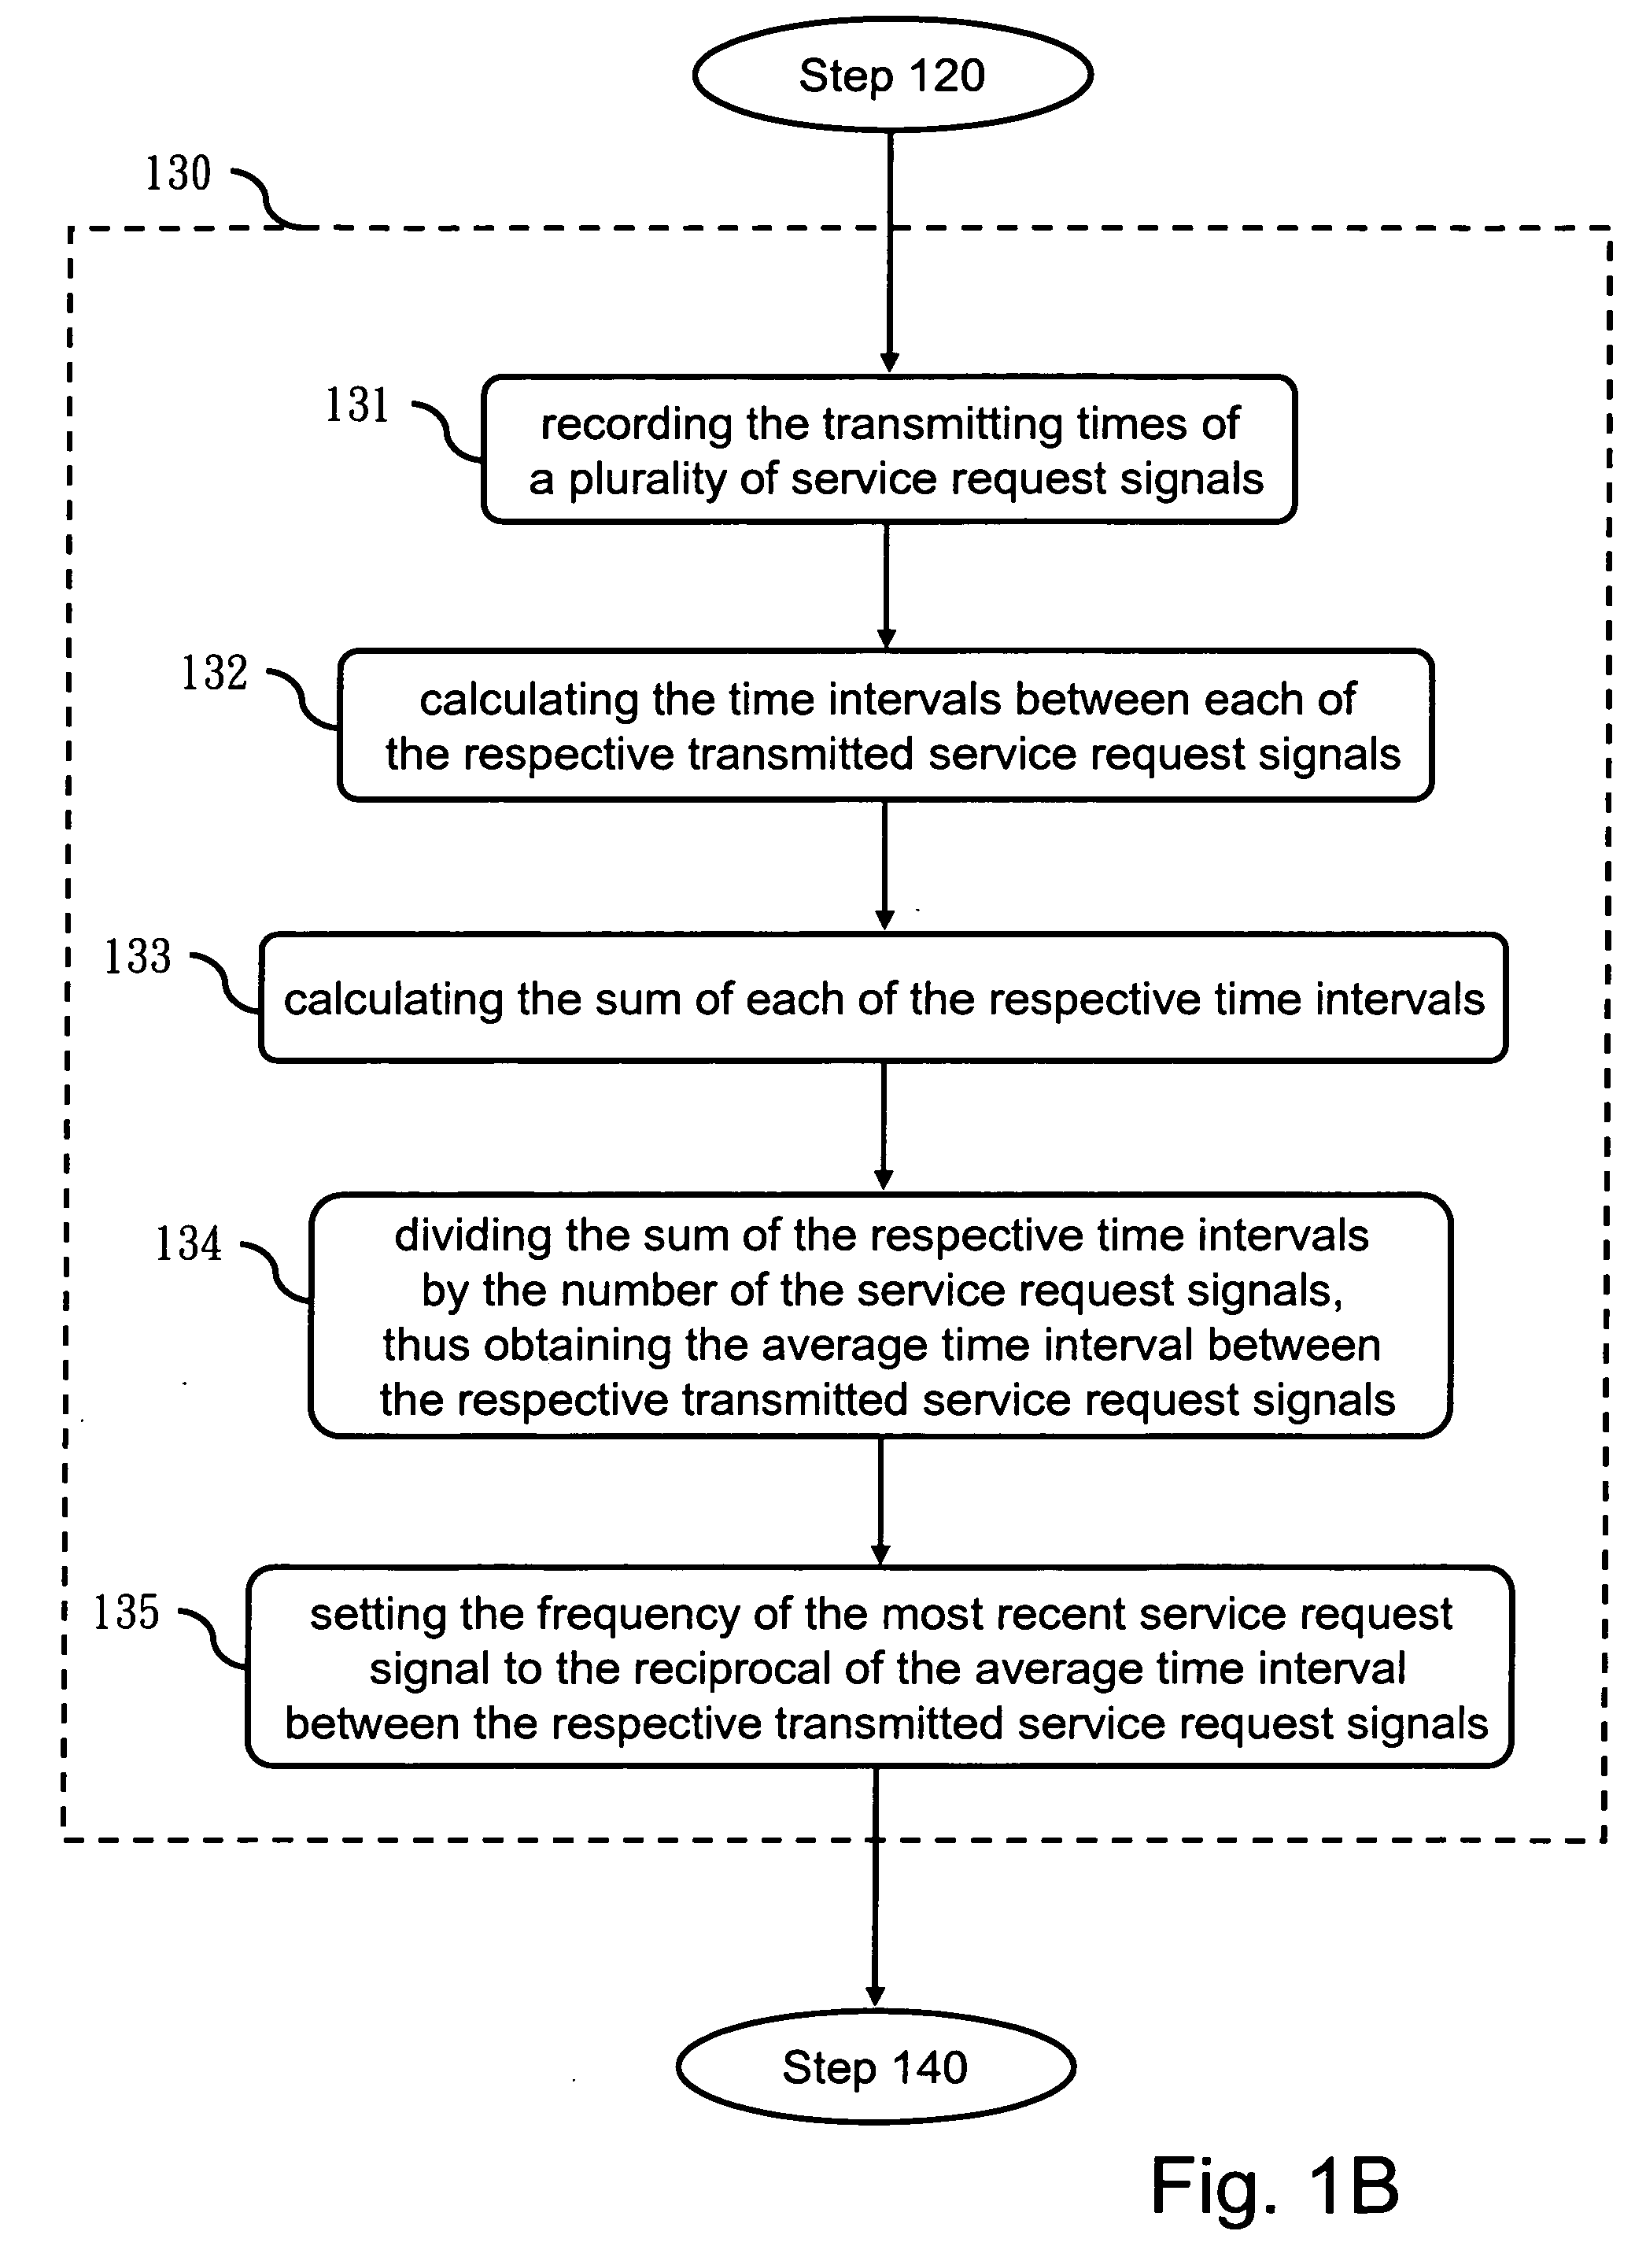 Real-time heartbeat frequency regulation system and method utilizing user-requested frequency